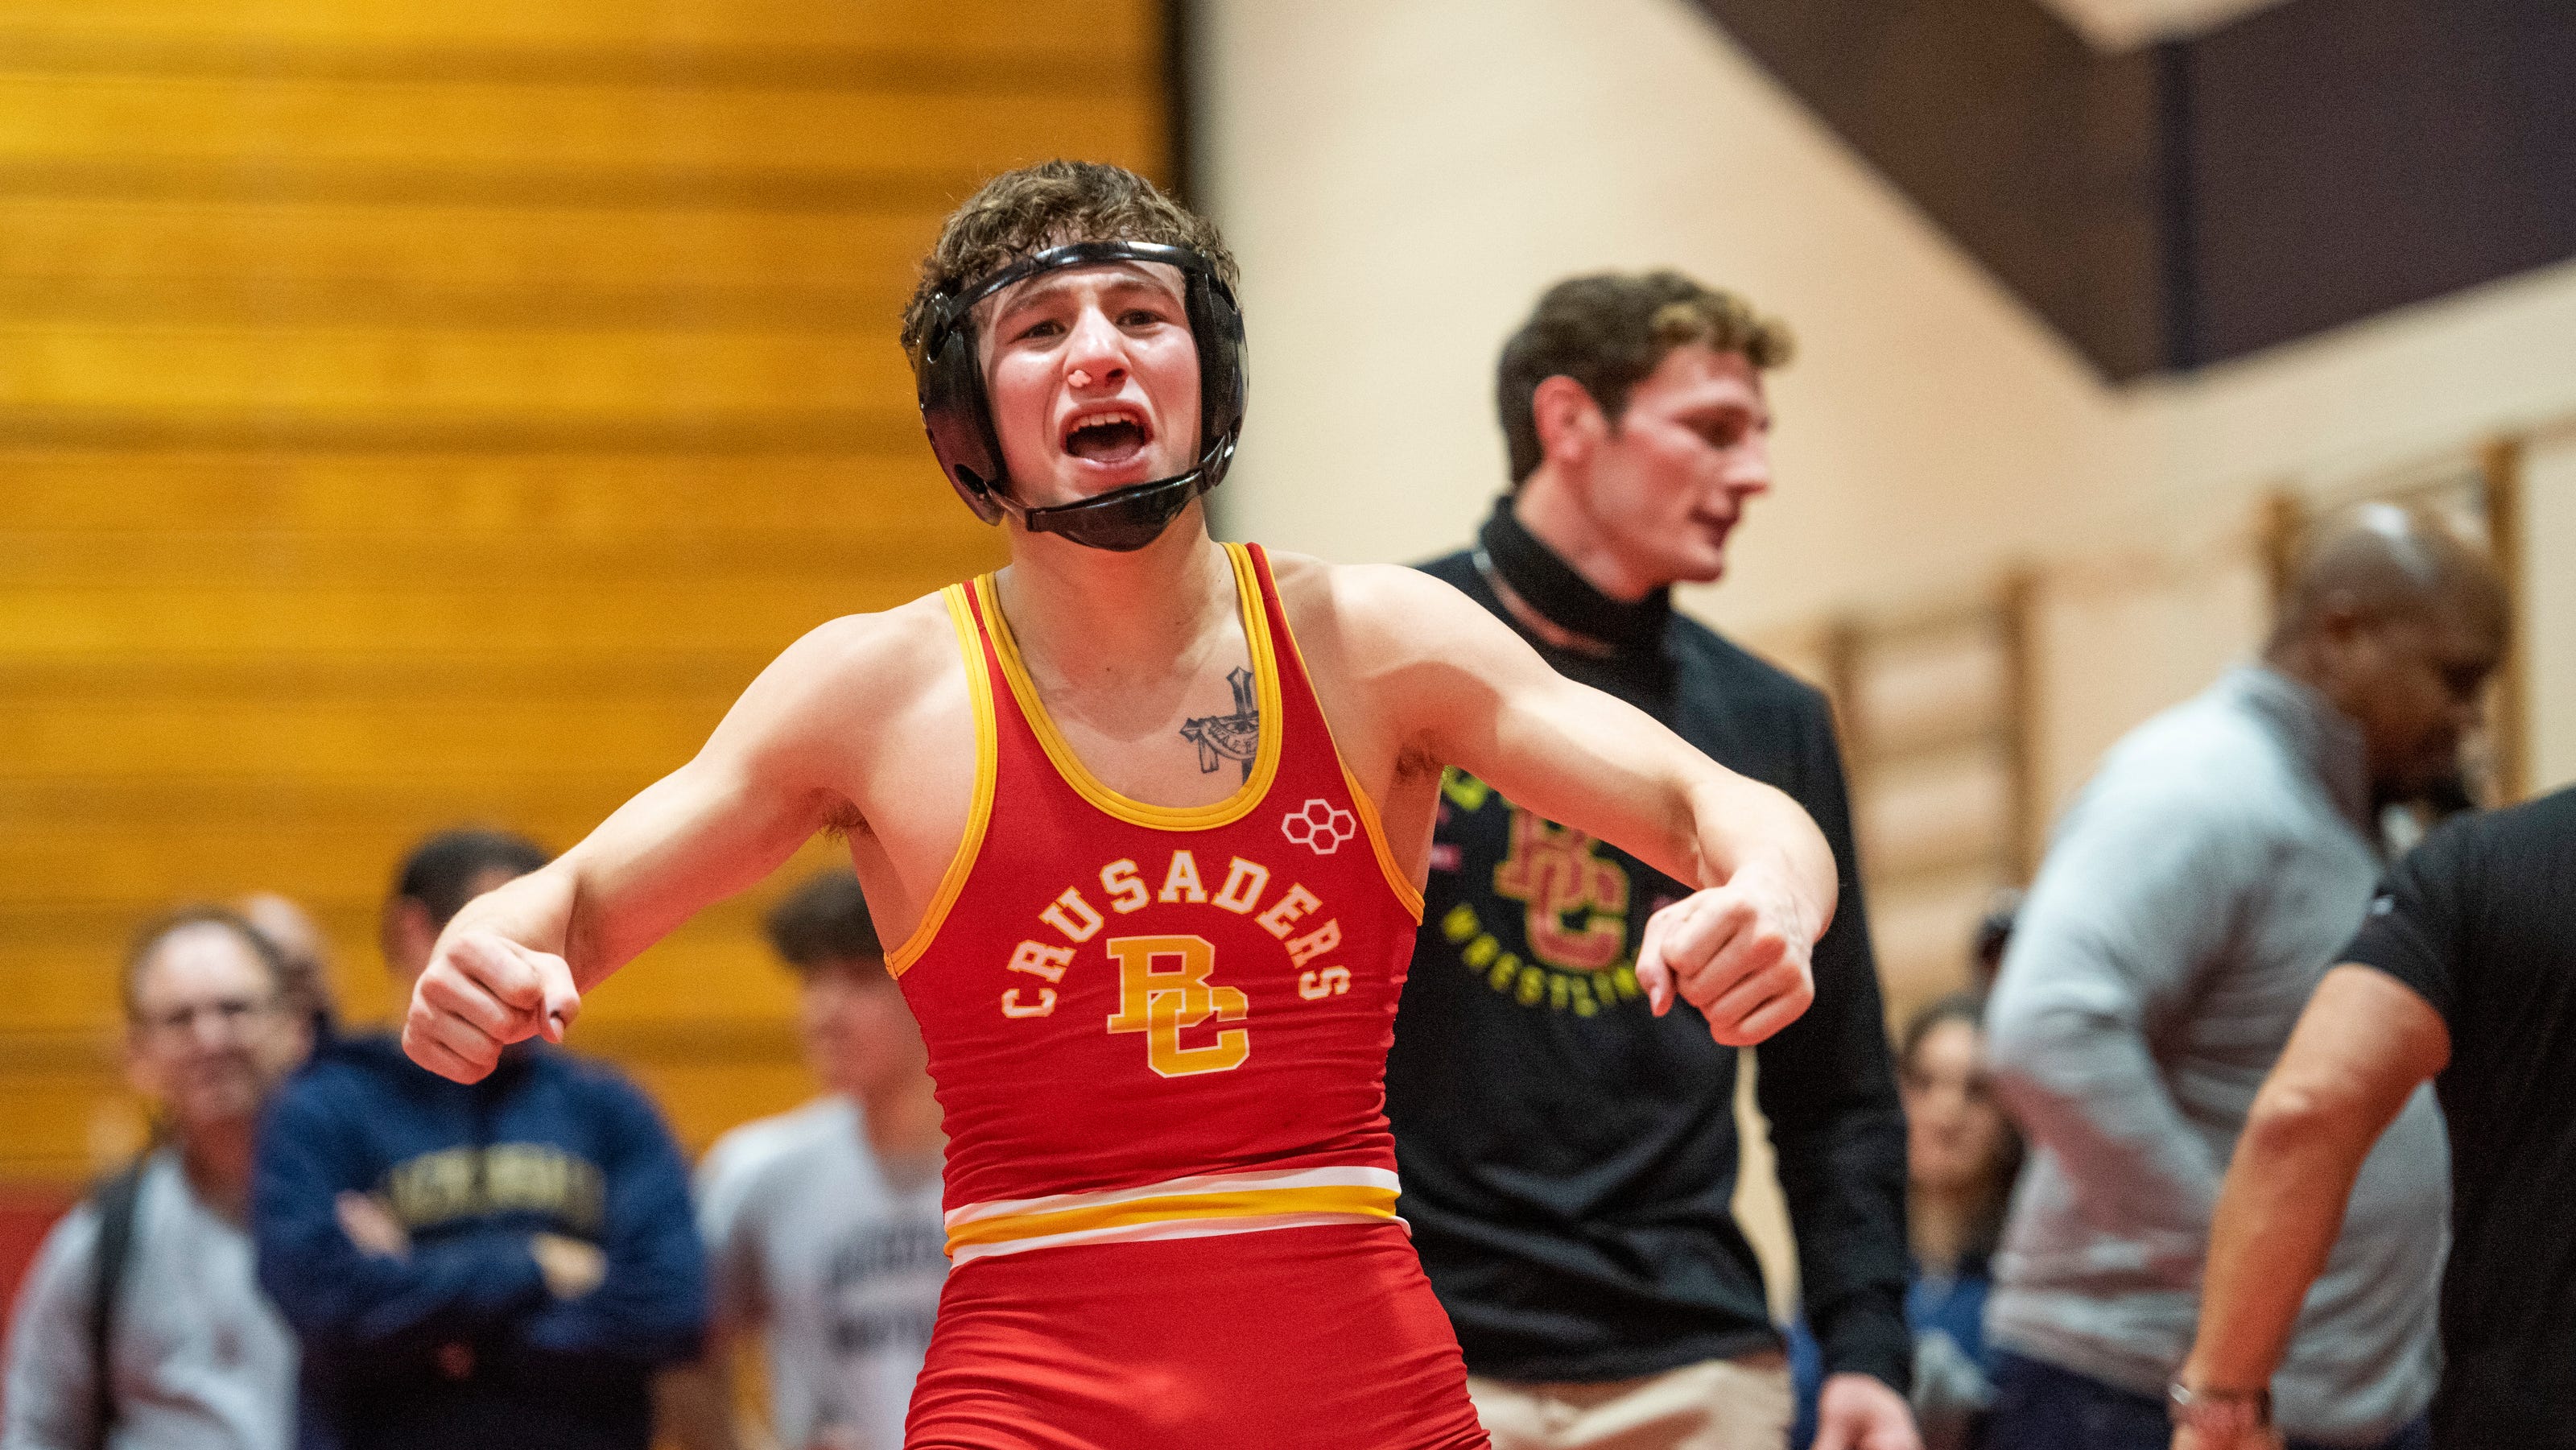 Bergen Catholic wrestling completes comeback in last bout to avoid upset